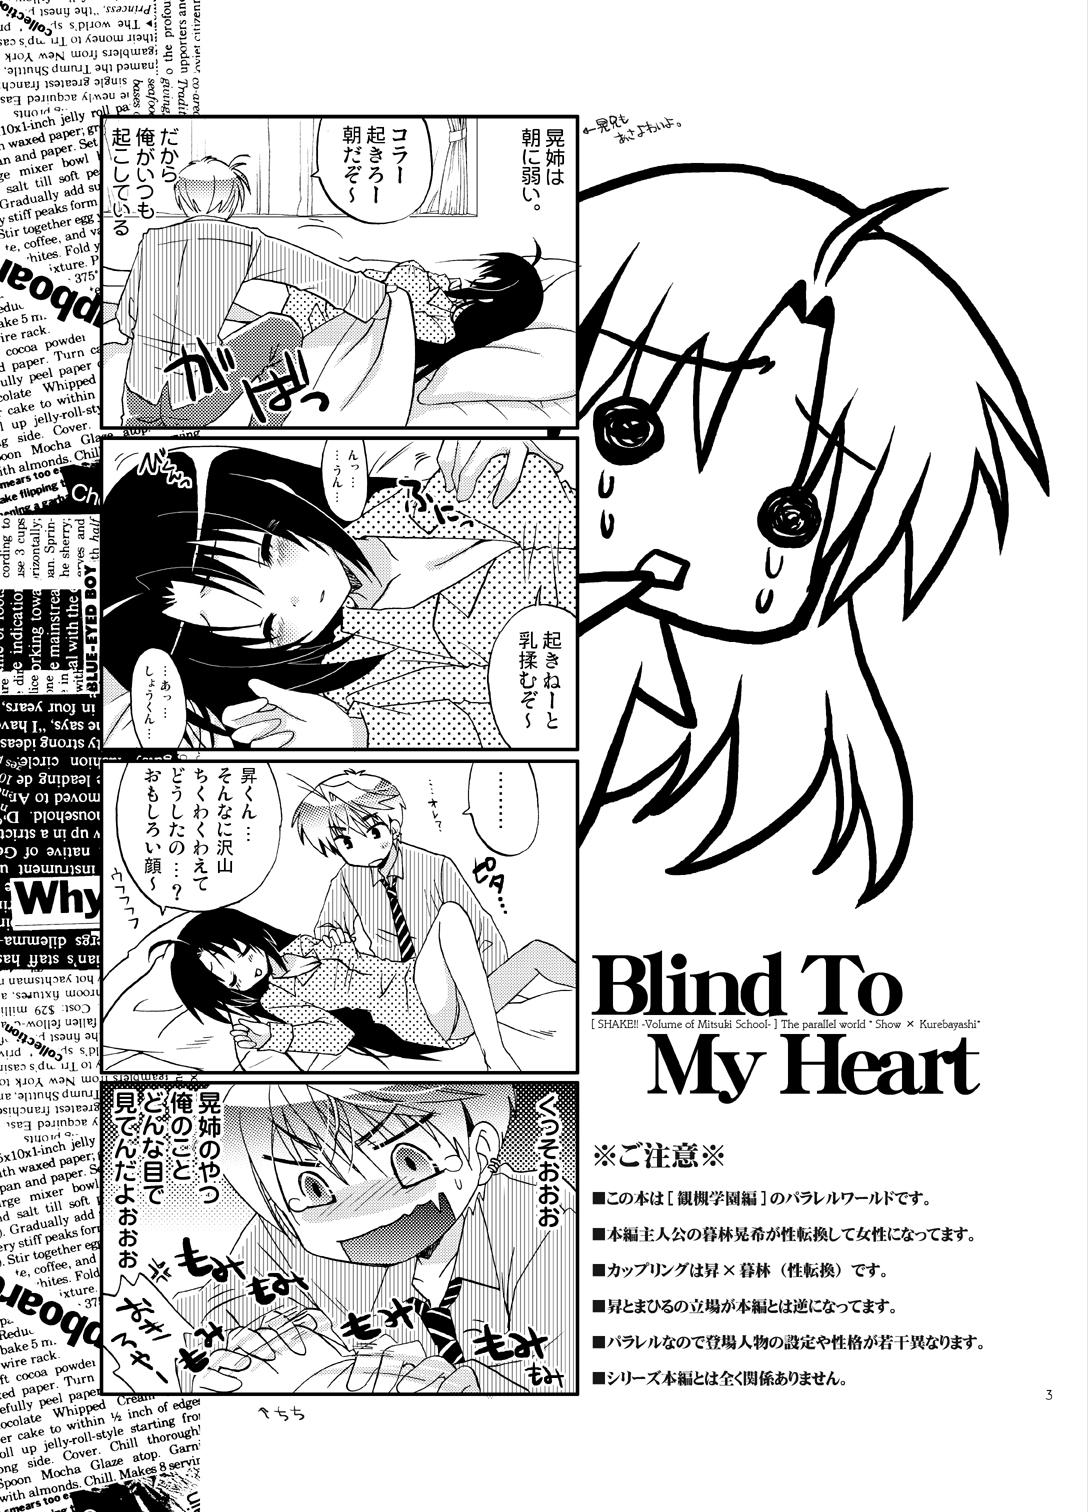 Blind To My Heart 1